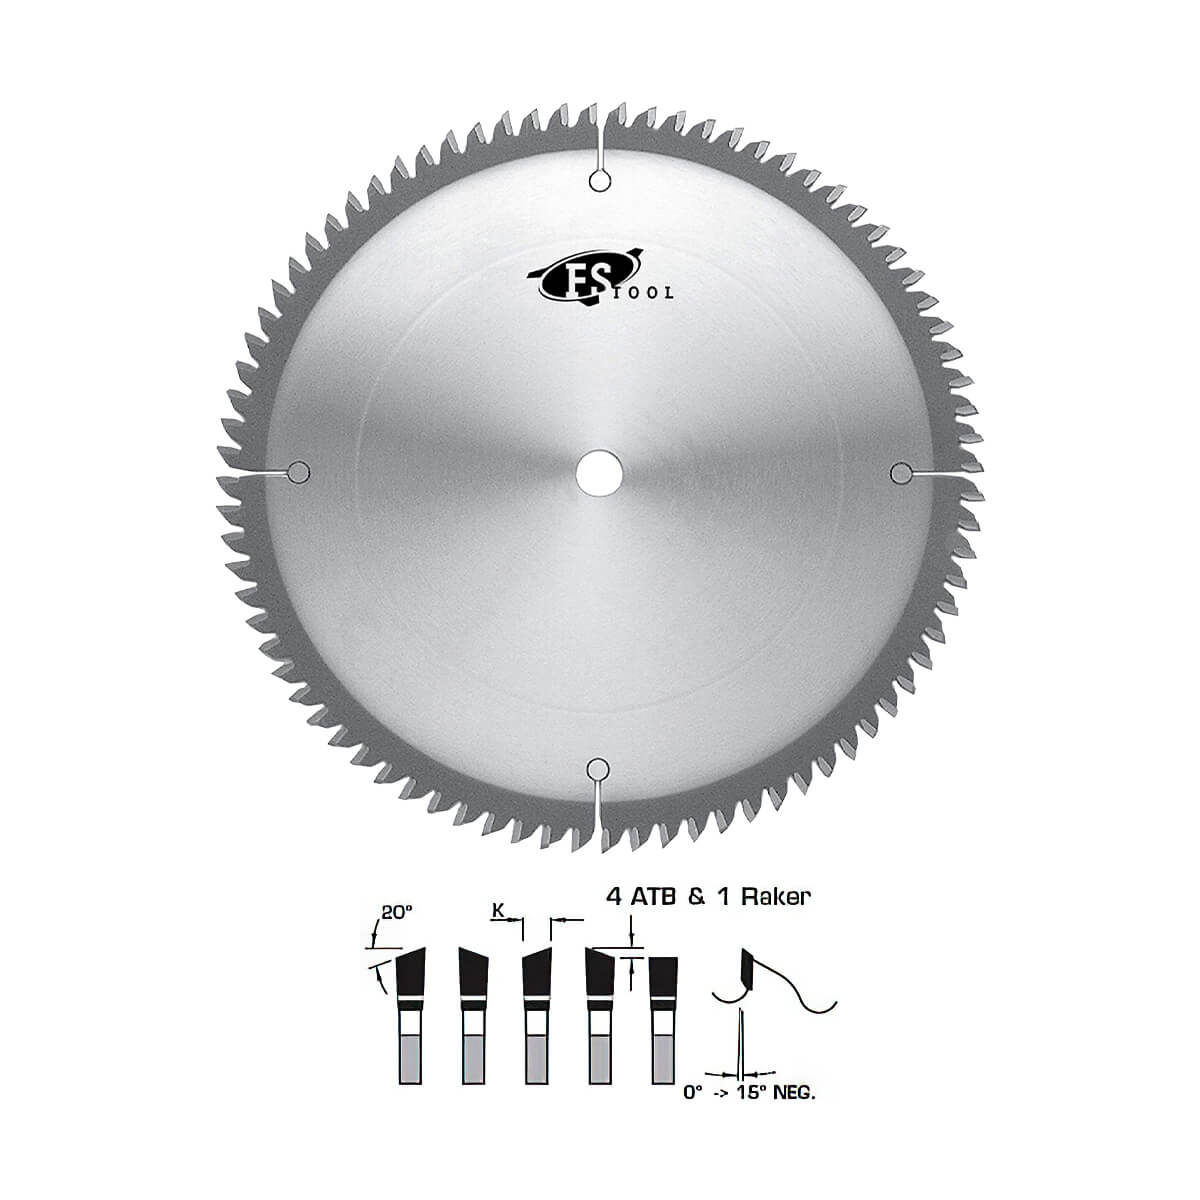 FS Tool LM4300 Saw Blade Mitre Joint Saw Blade 12" 80 Tooth 1" Bore